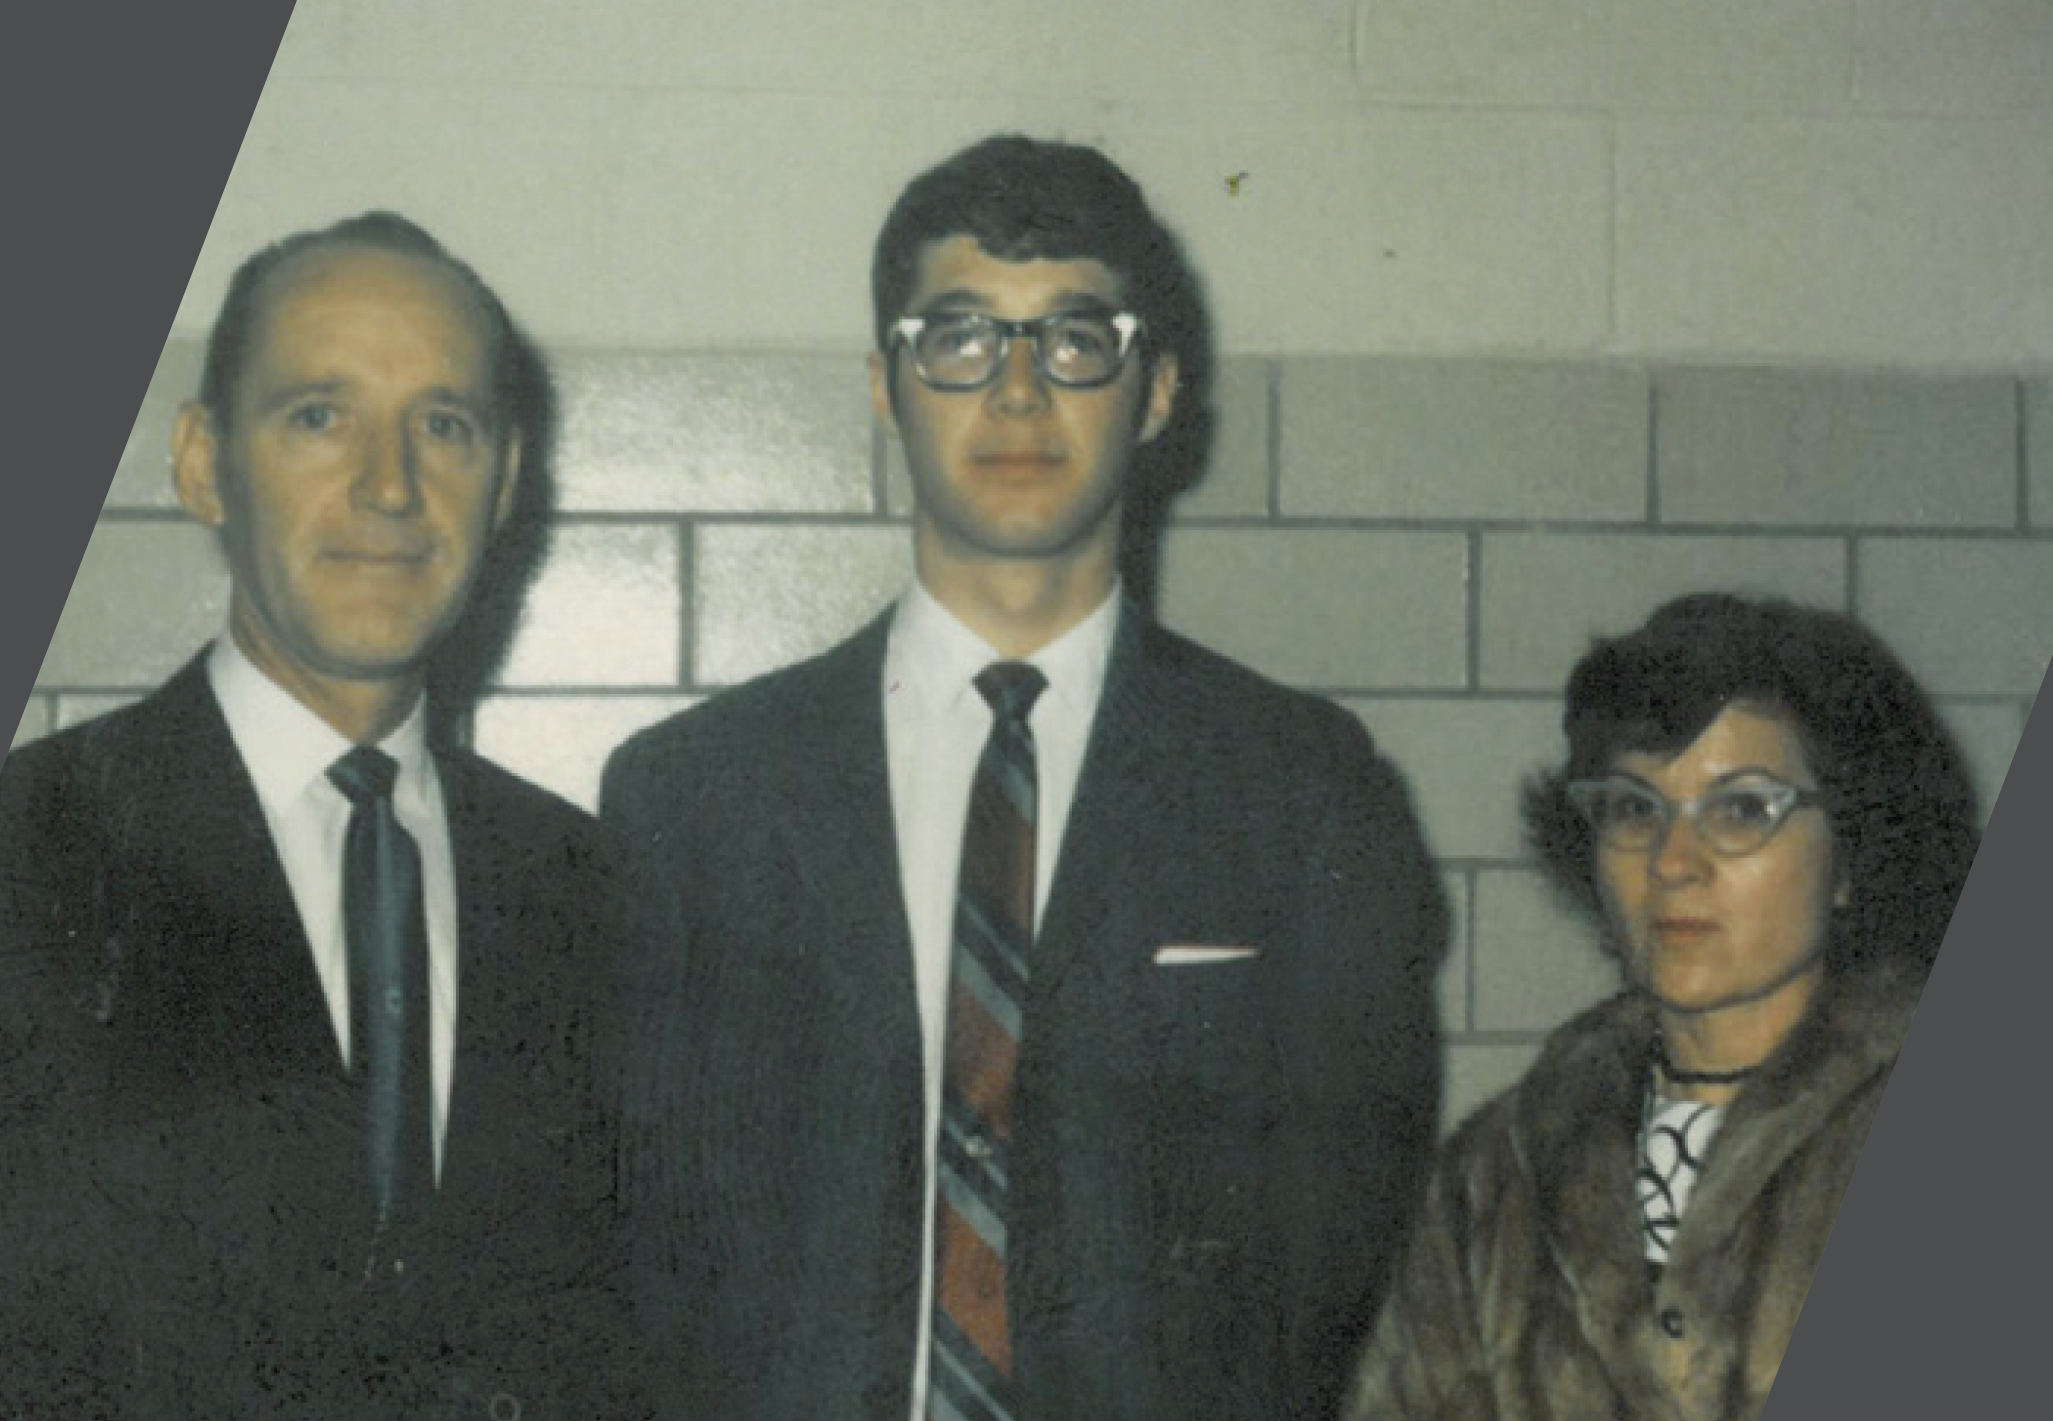 Jim and his parents facing the camera and smiling